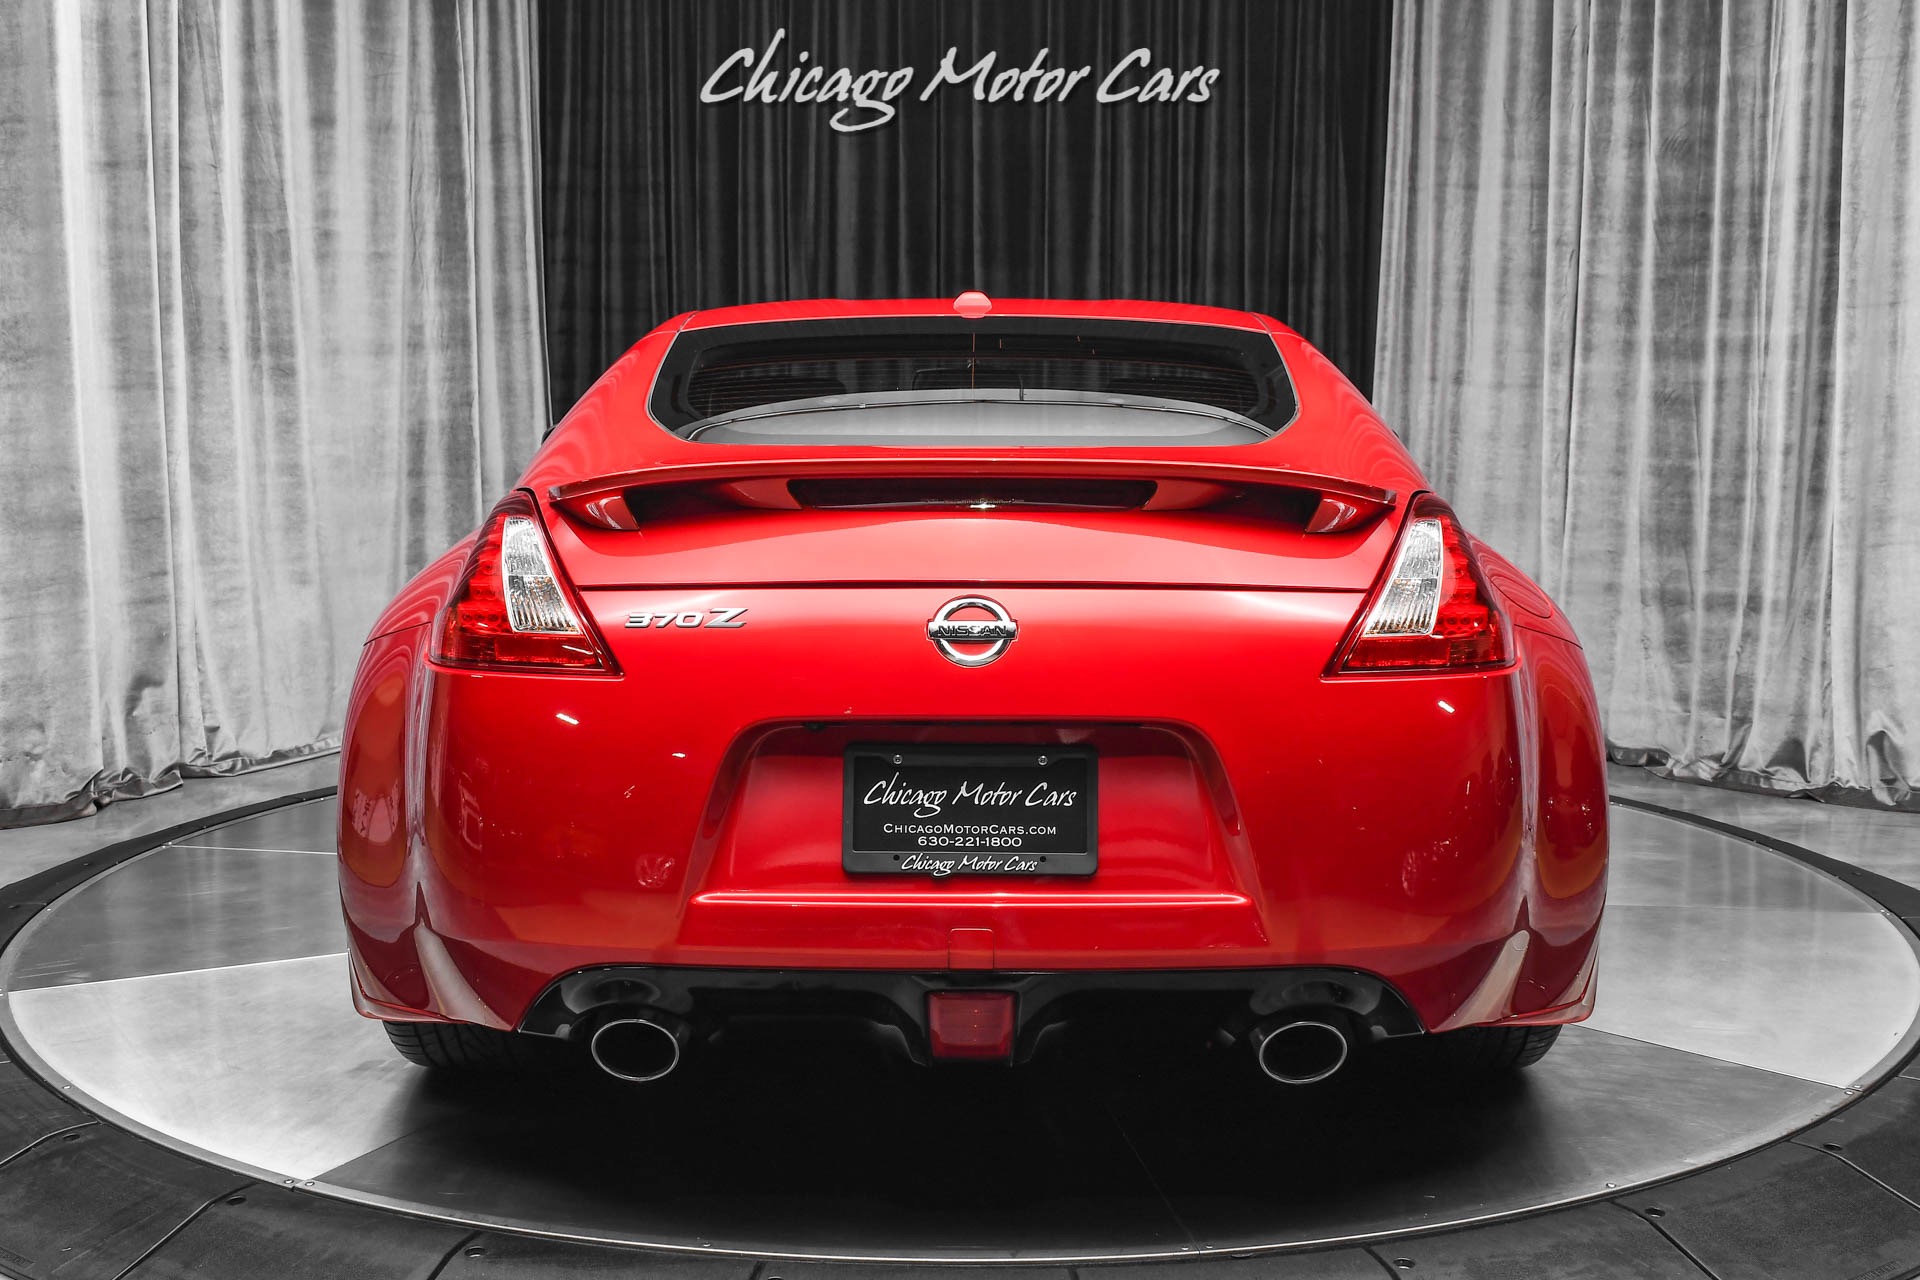 Used-2019-Nissan-370Z-SPORT-TOURING-Coupe-Navi-Passion-Red-6-Speed-Manual-Just-Serviced-Low-Miles